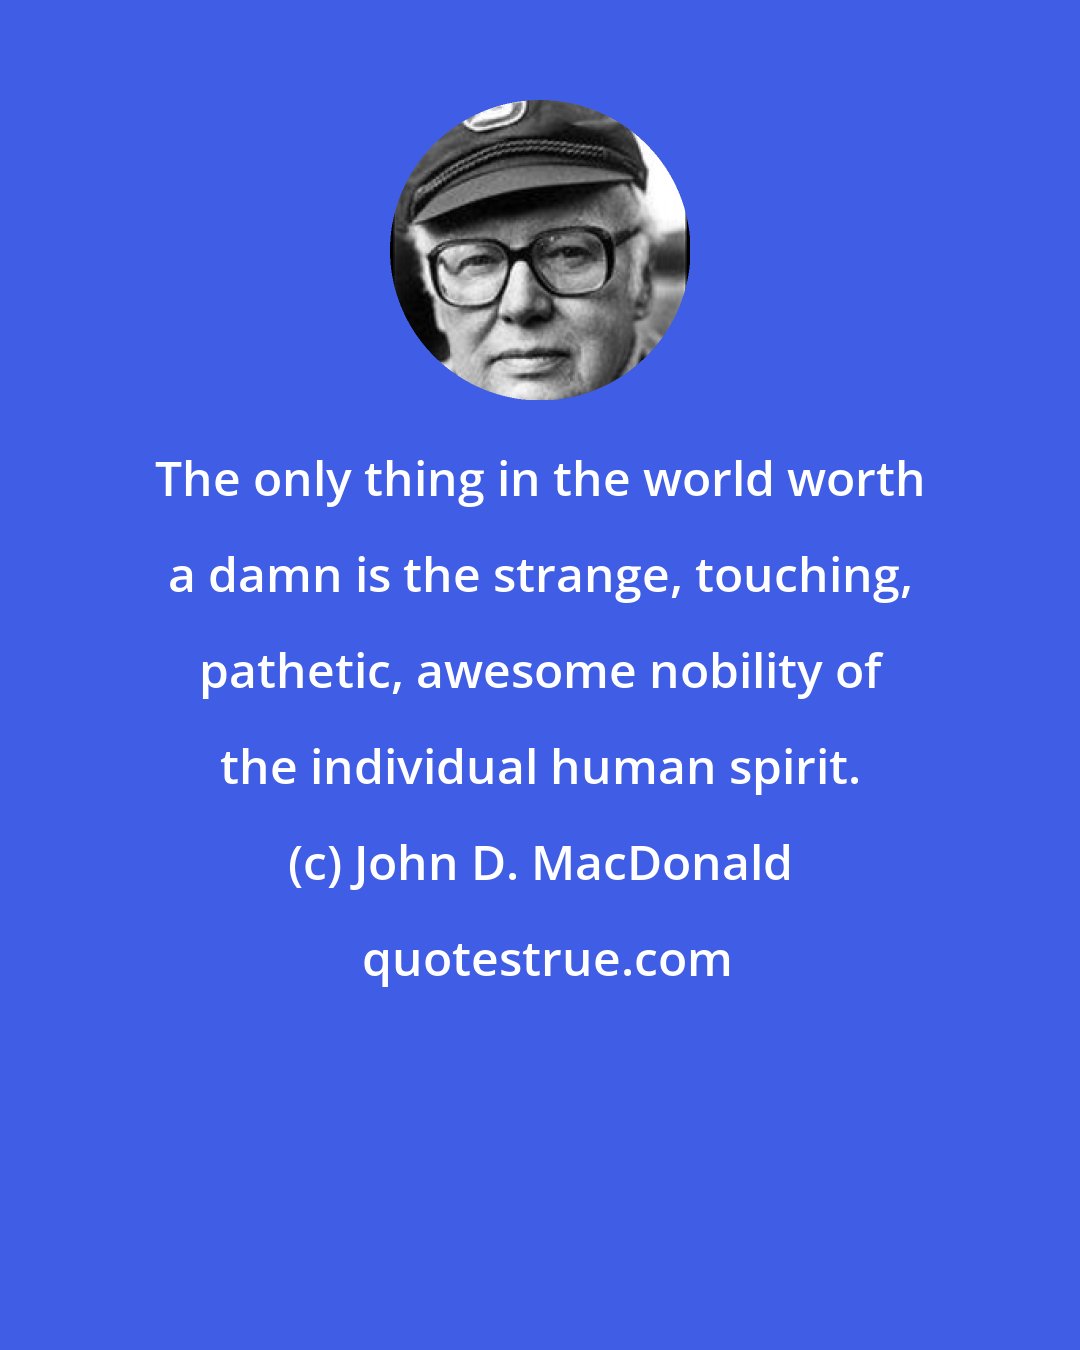 John D. MacDonald: The only thing in the world worth a damn is the strange, touching, pathetic, awesome nobility of the individual human spirit.